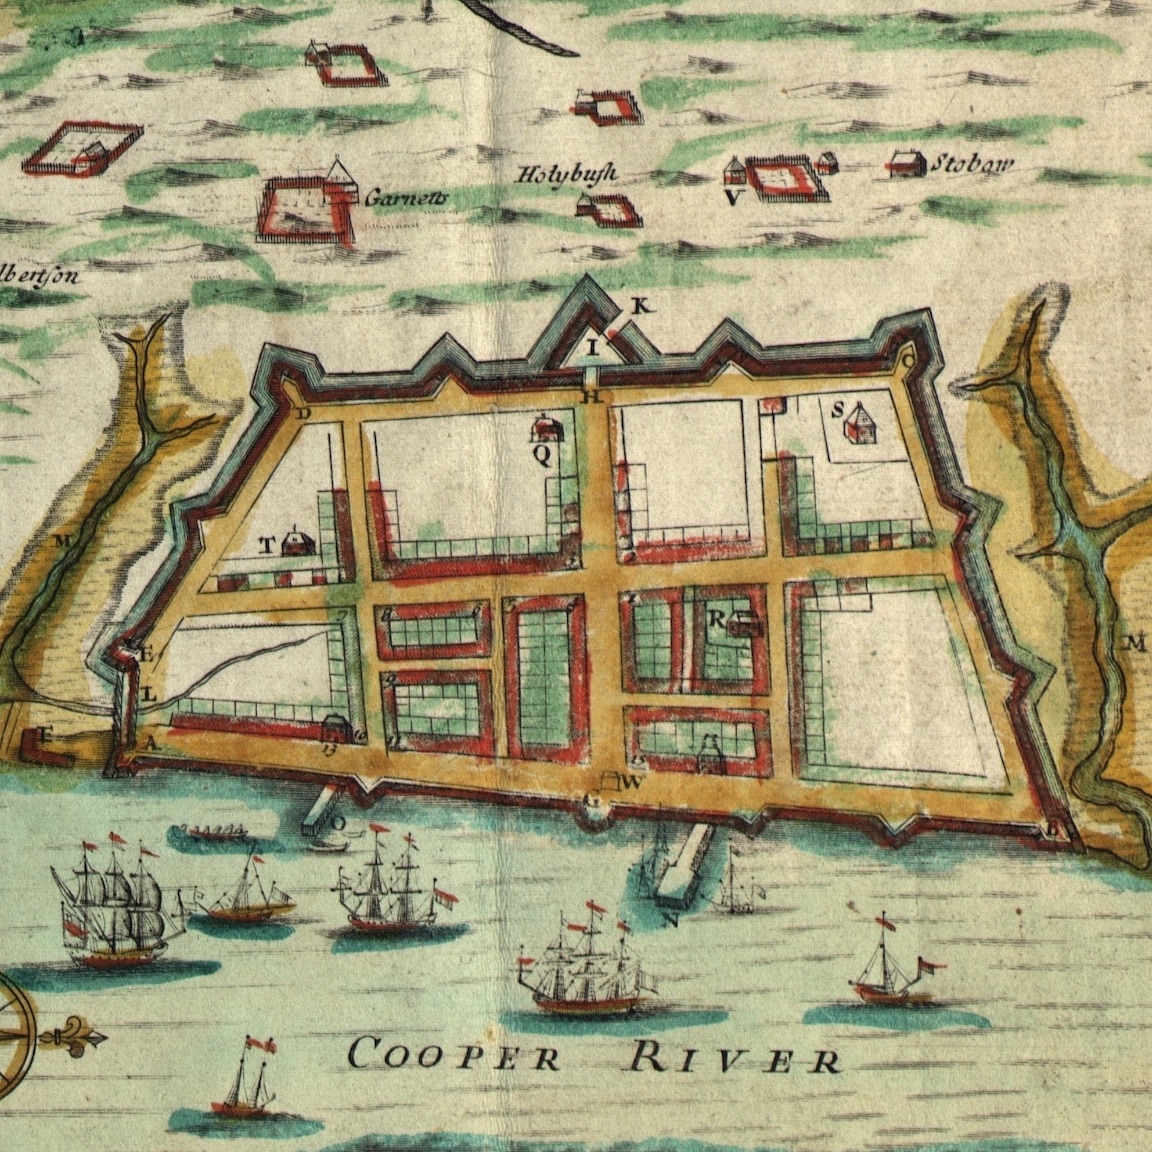 A map of Charleston popularly known as the “Crisp Map” of 1711